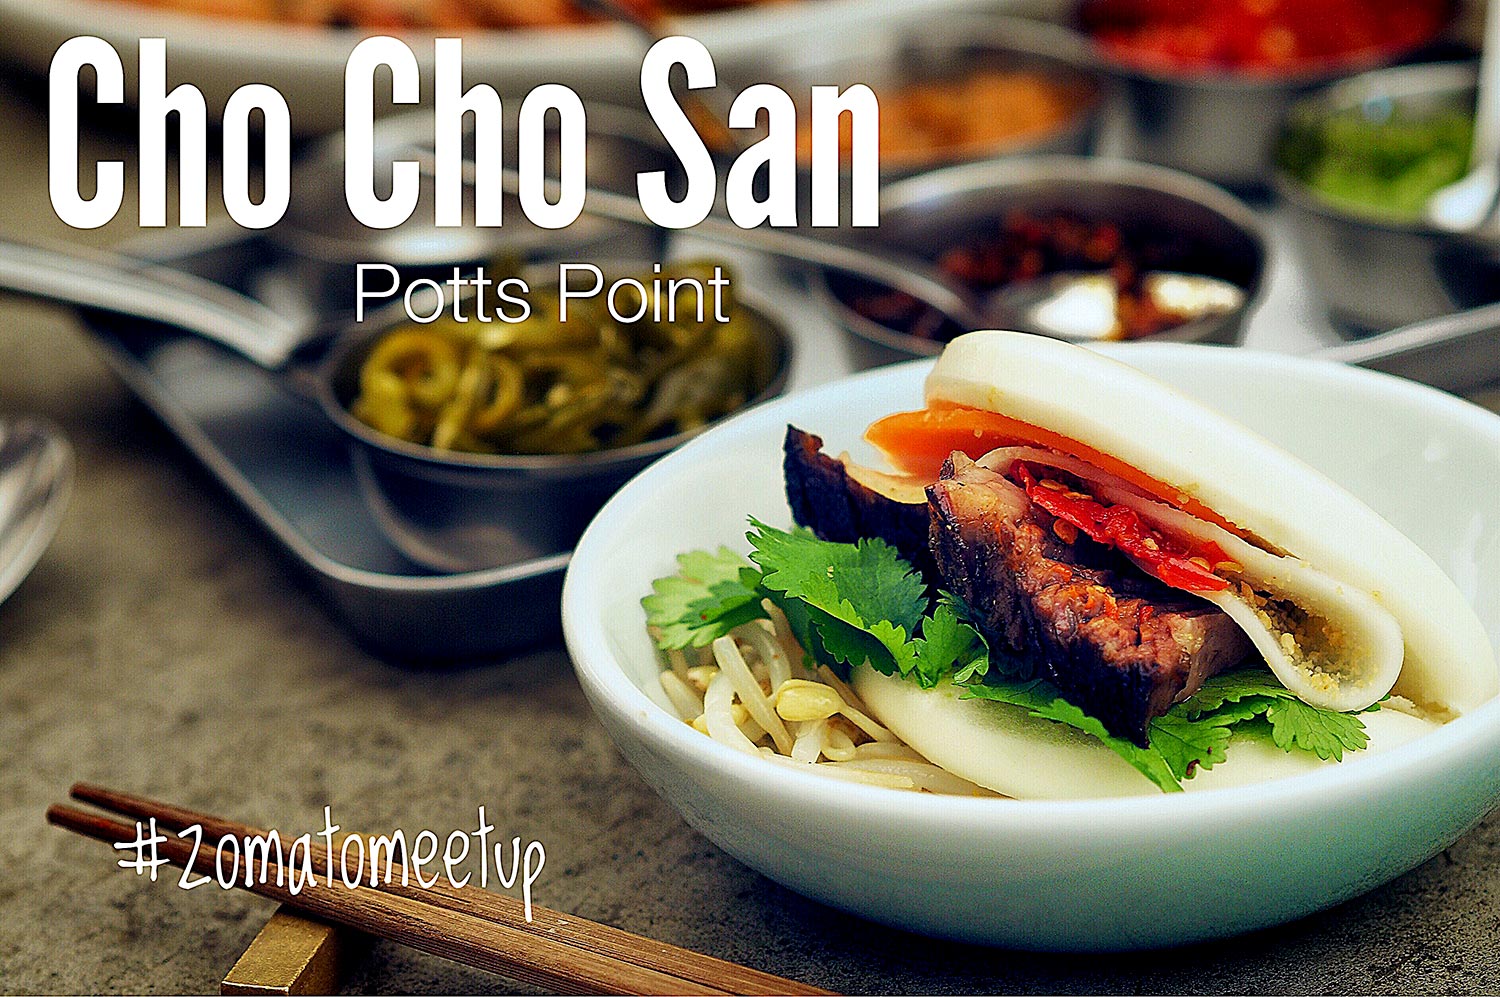 Review of Cho Cho San, Potts Point